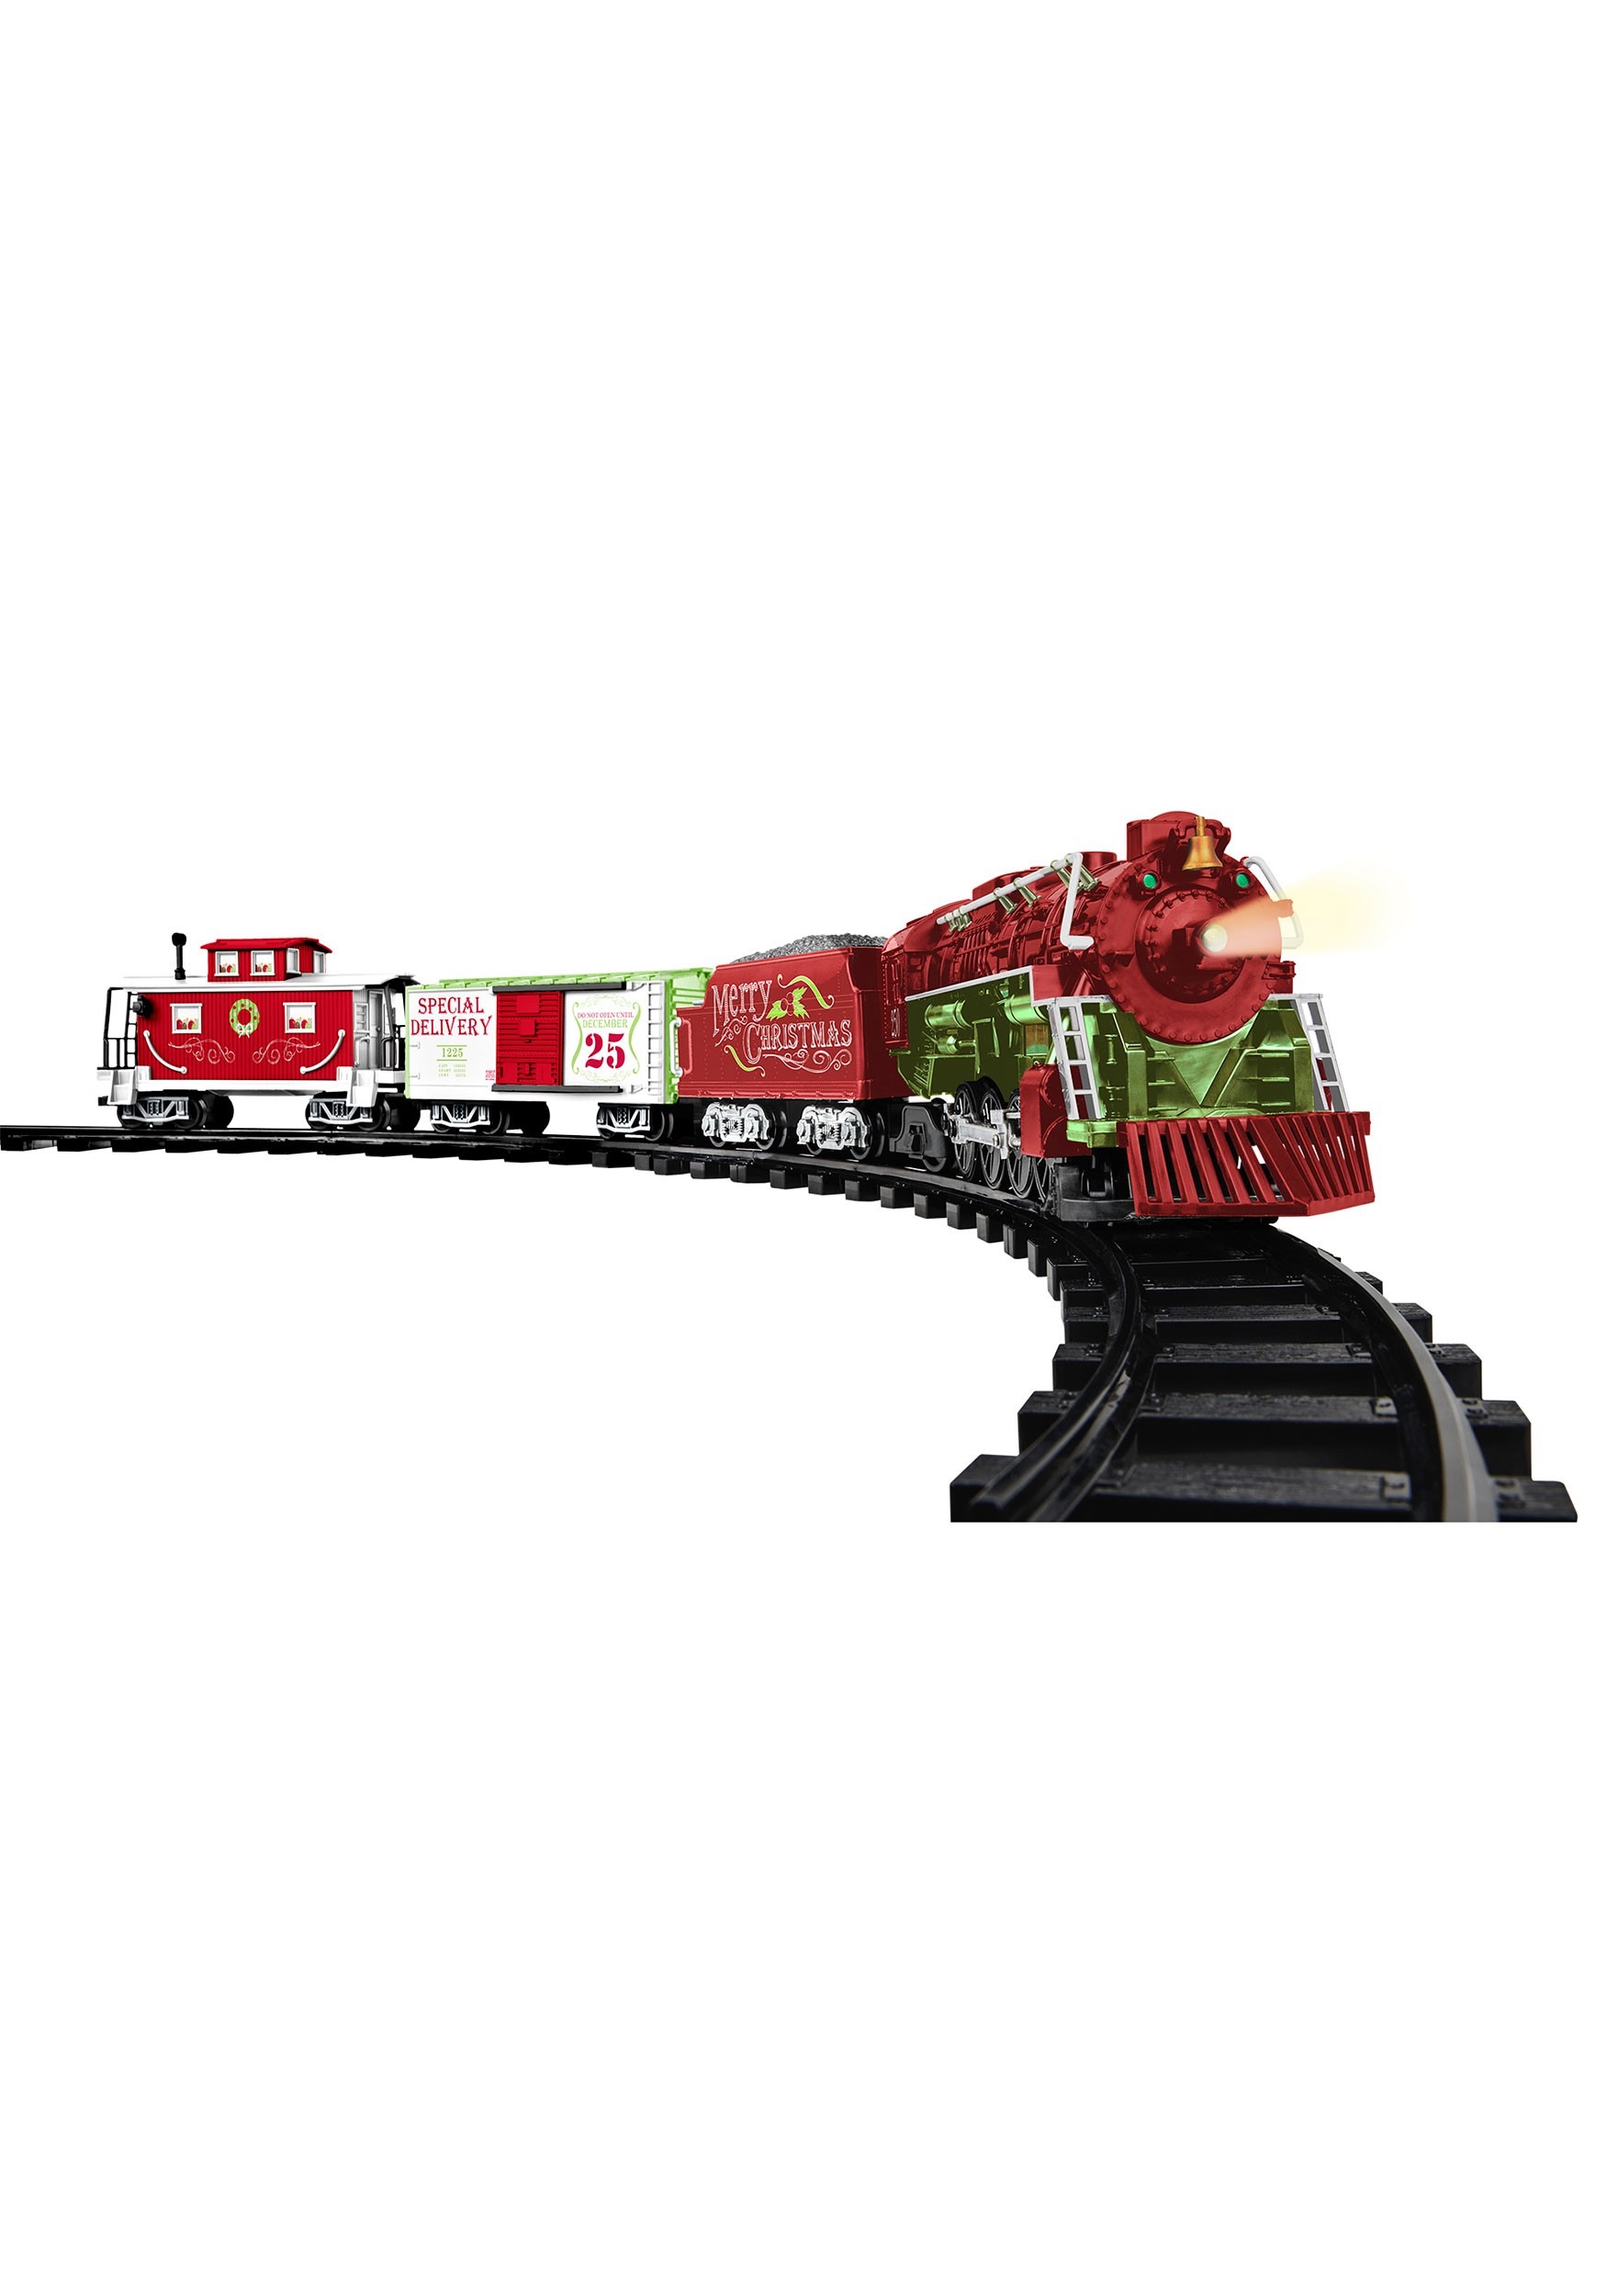 Christmas Ready-to-Play Lionel Train Set